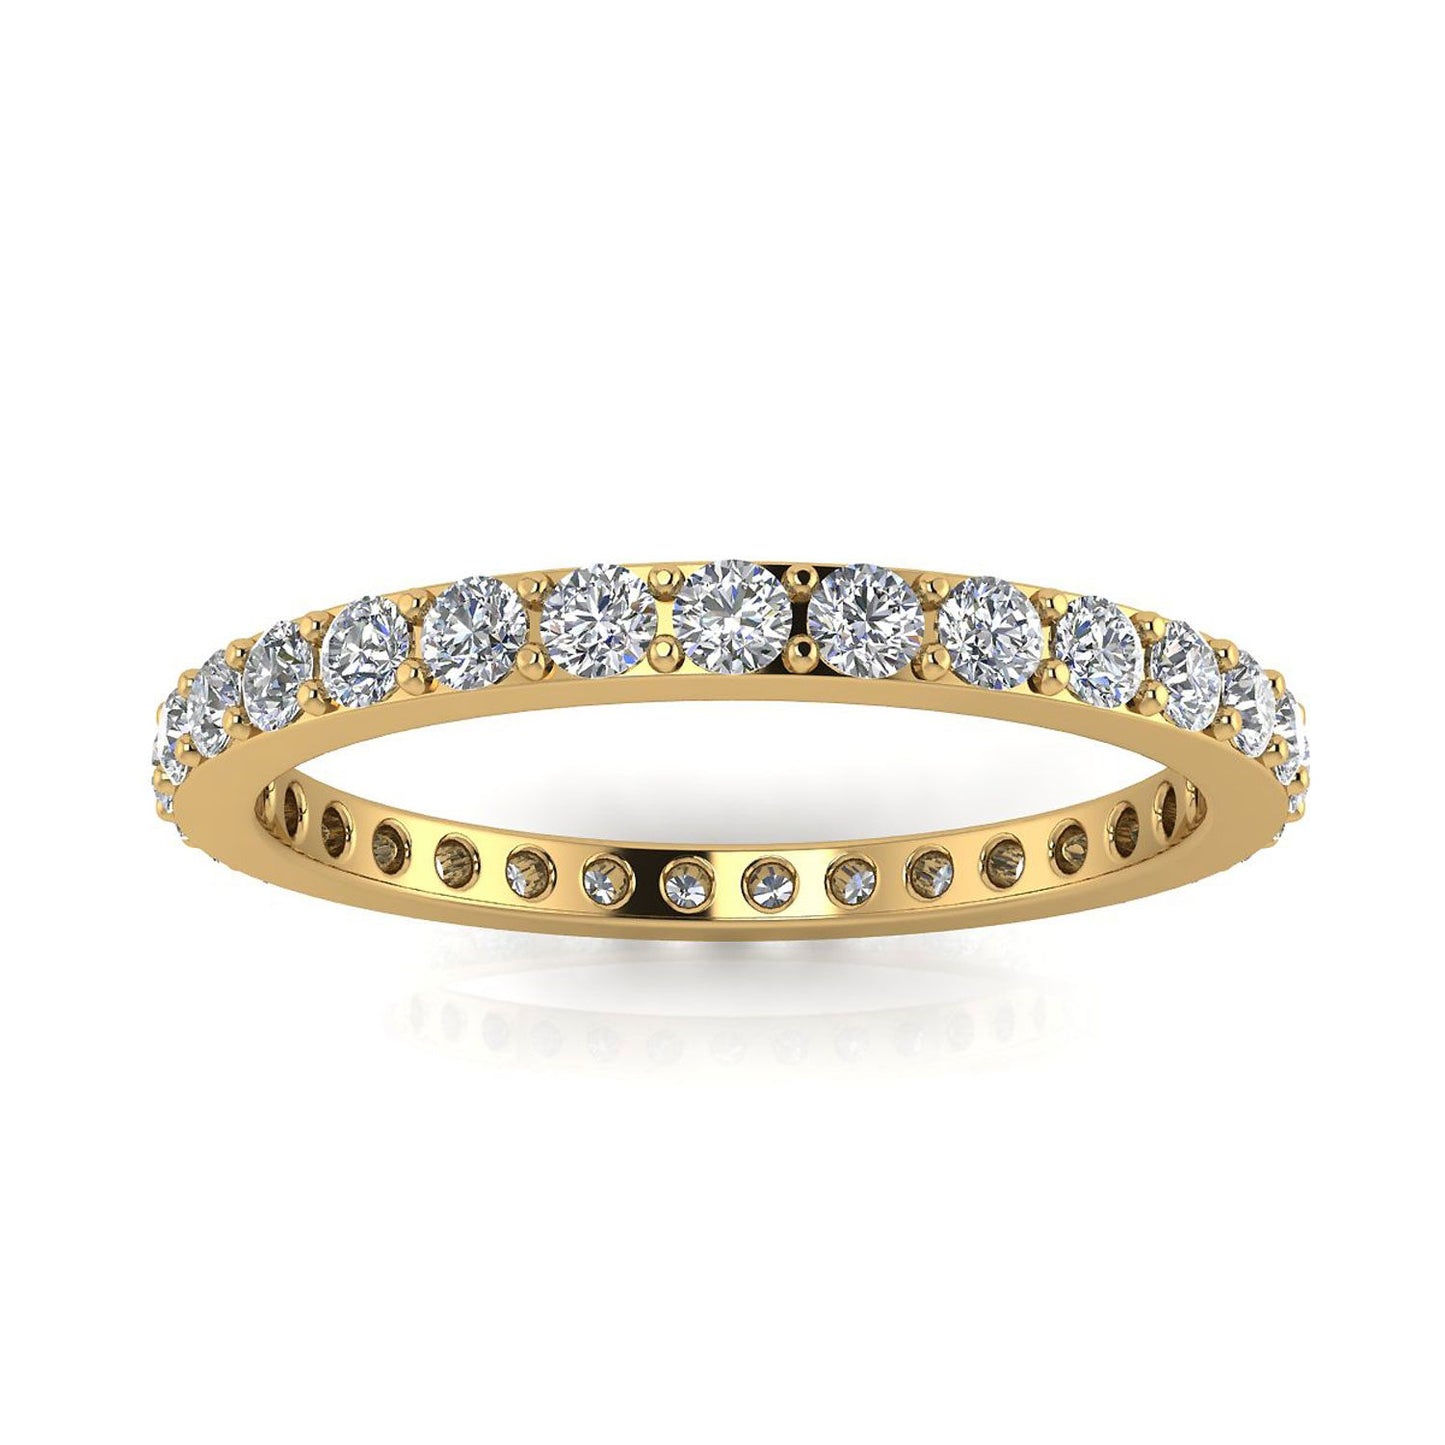 Round Brilliant Cut Diamond Pave Set Eternity Ring In 18k Yellow Gold  (0.52ct. Tw.) Ring Size 9